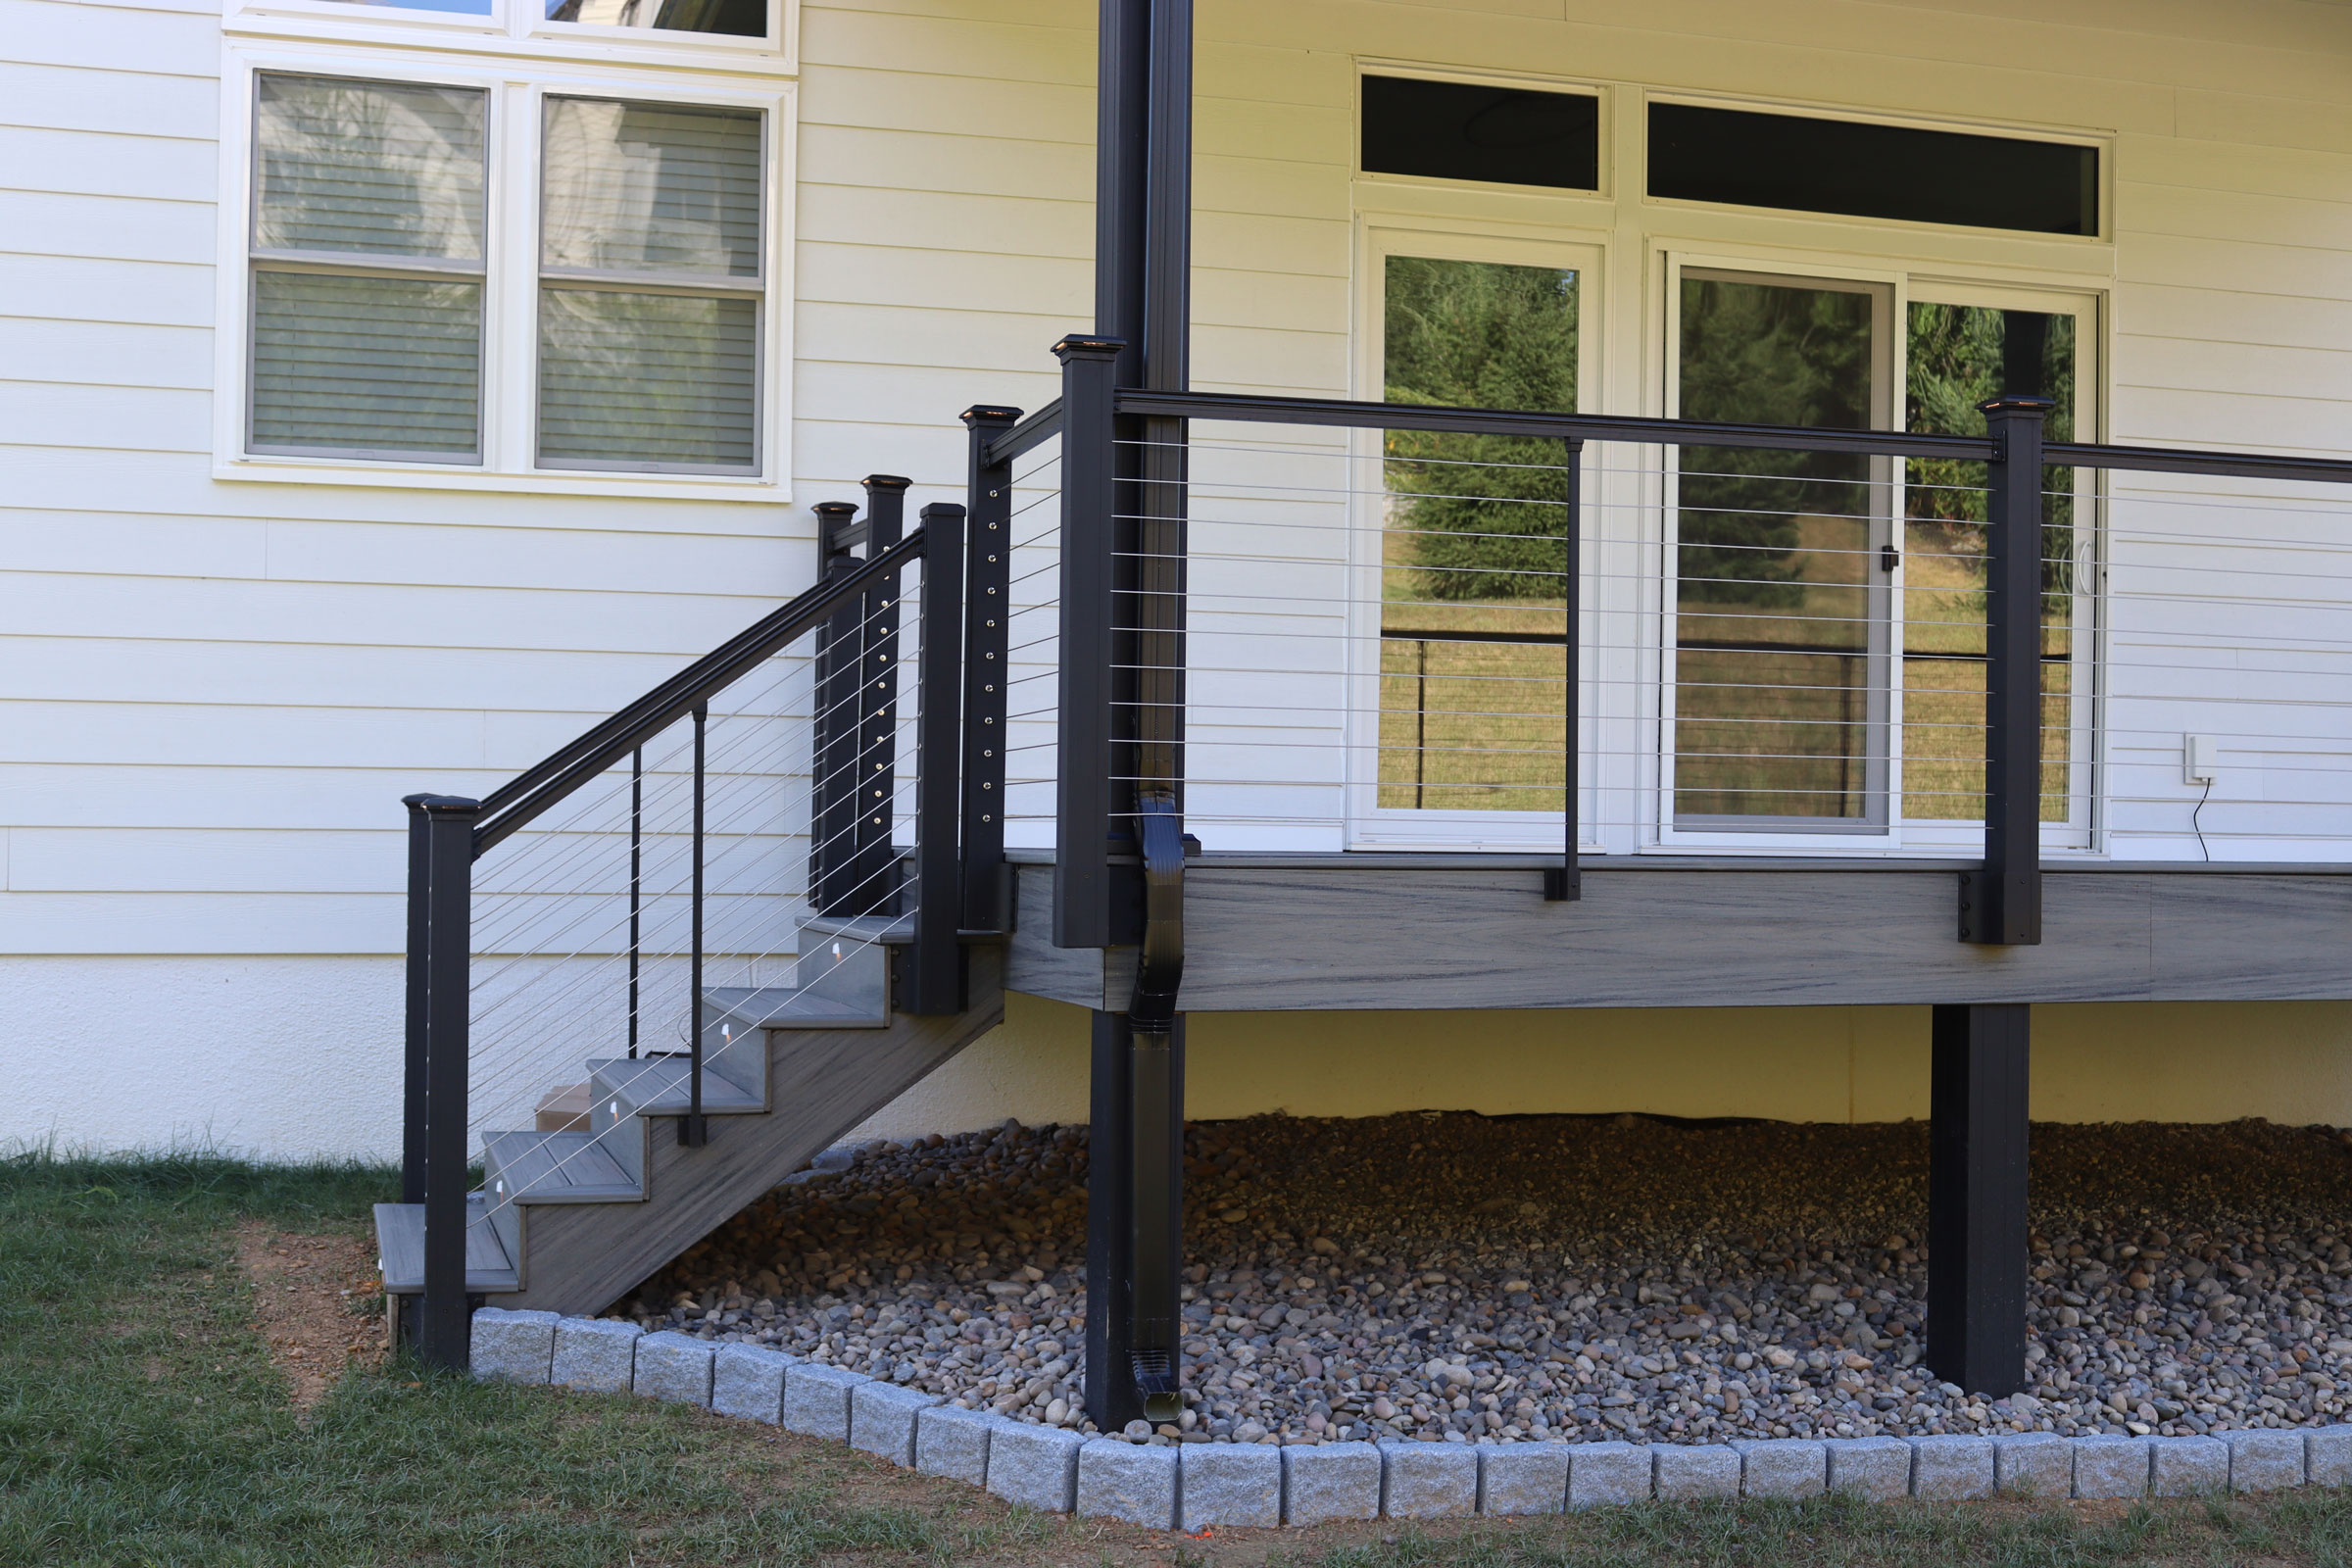 3 Reasons to Use Fascia Mounted Railing on Your Deck Project